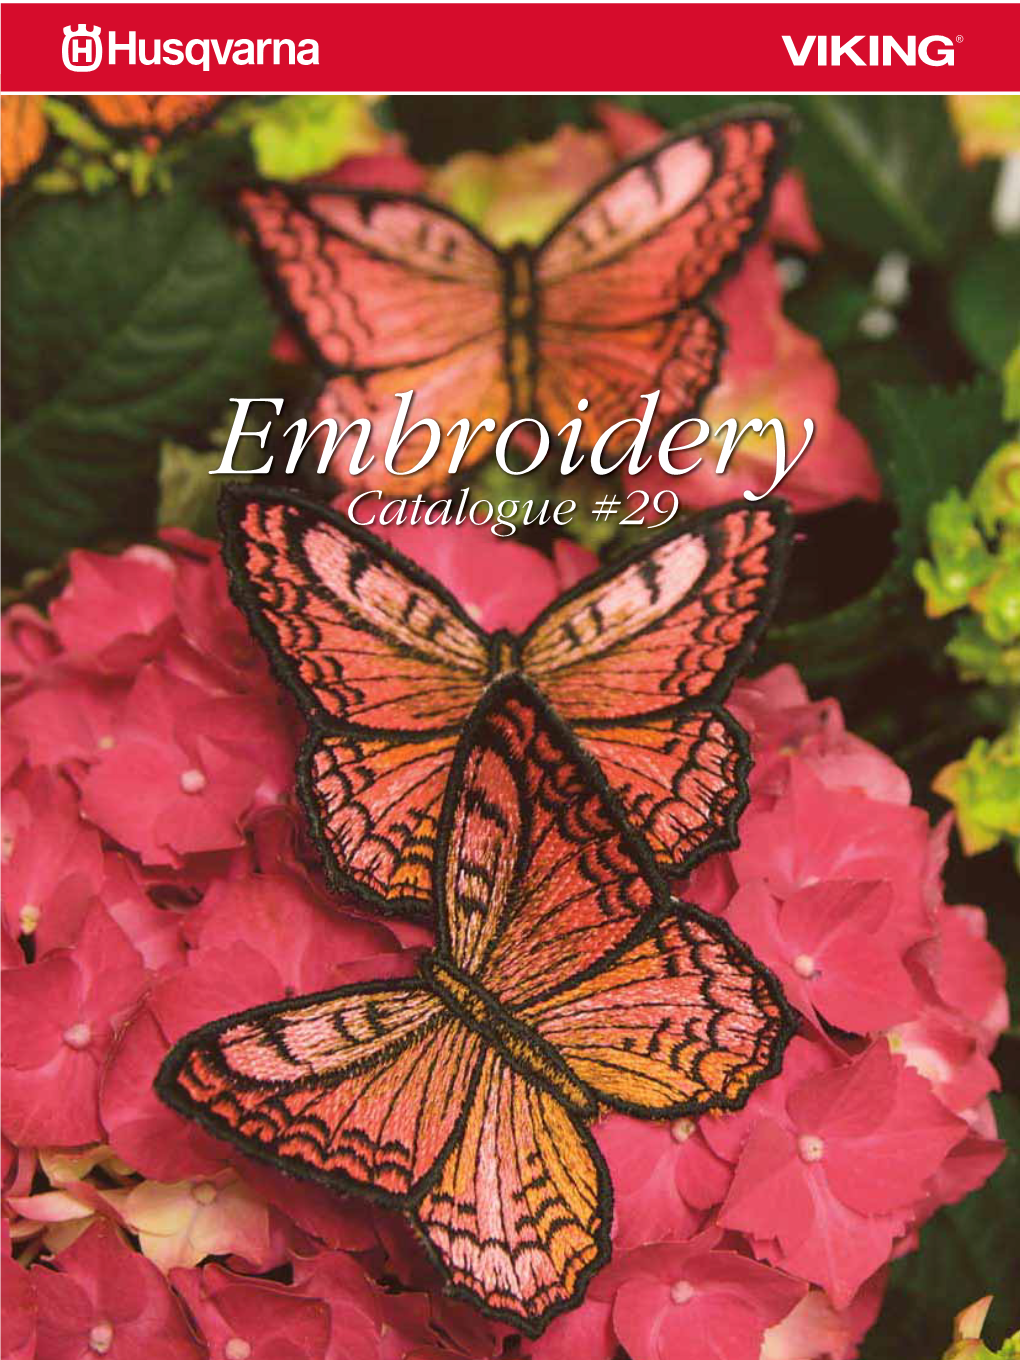 Embroidery Catalogue #29 Embroidery Hoop Assortment